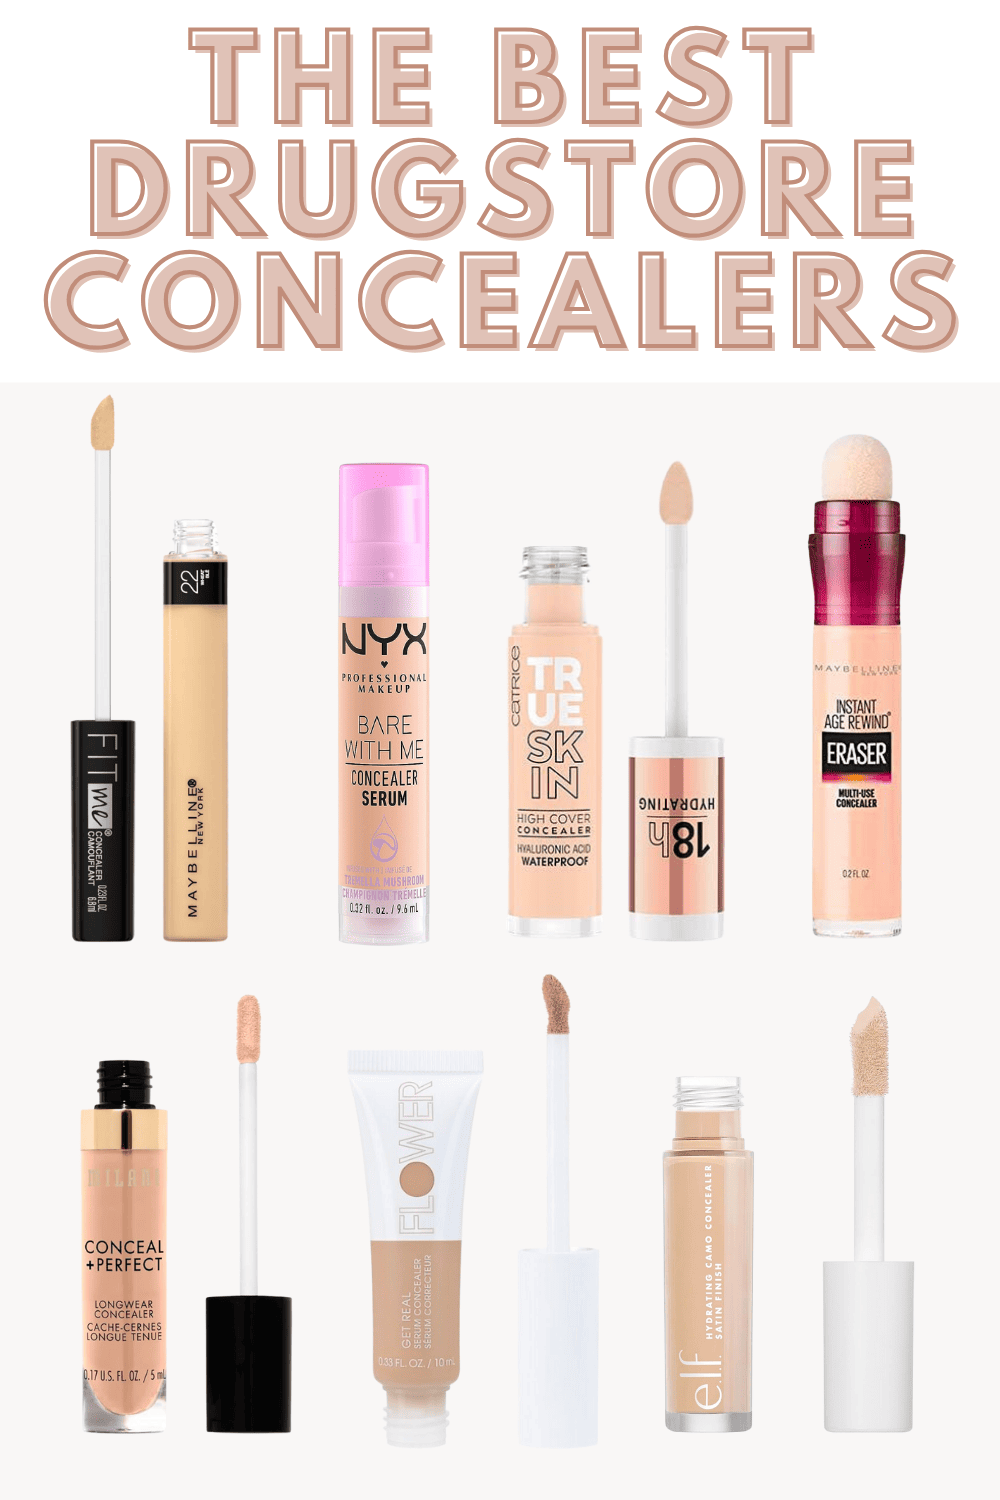 Discover the BEST of the best drugstore concealers. There's something for all skin types right here!